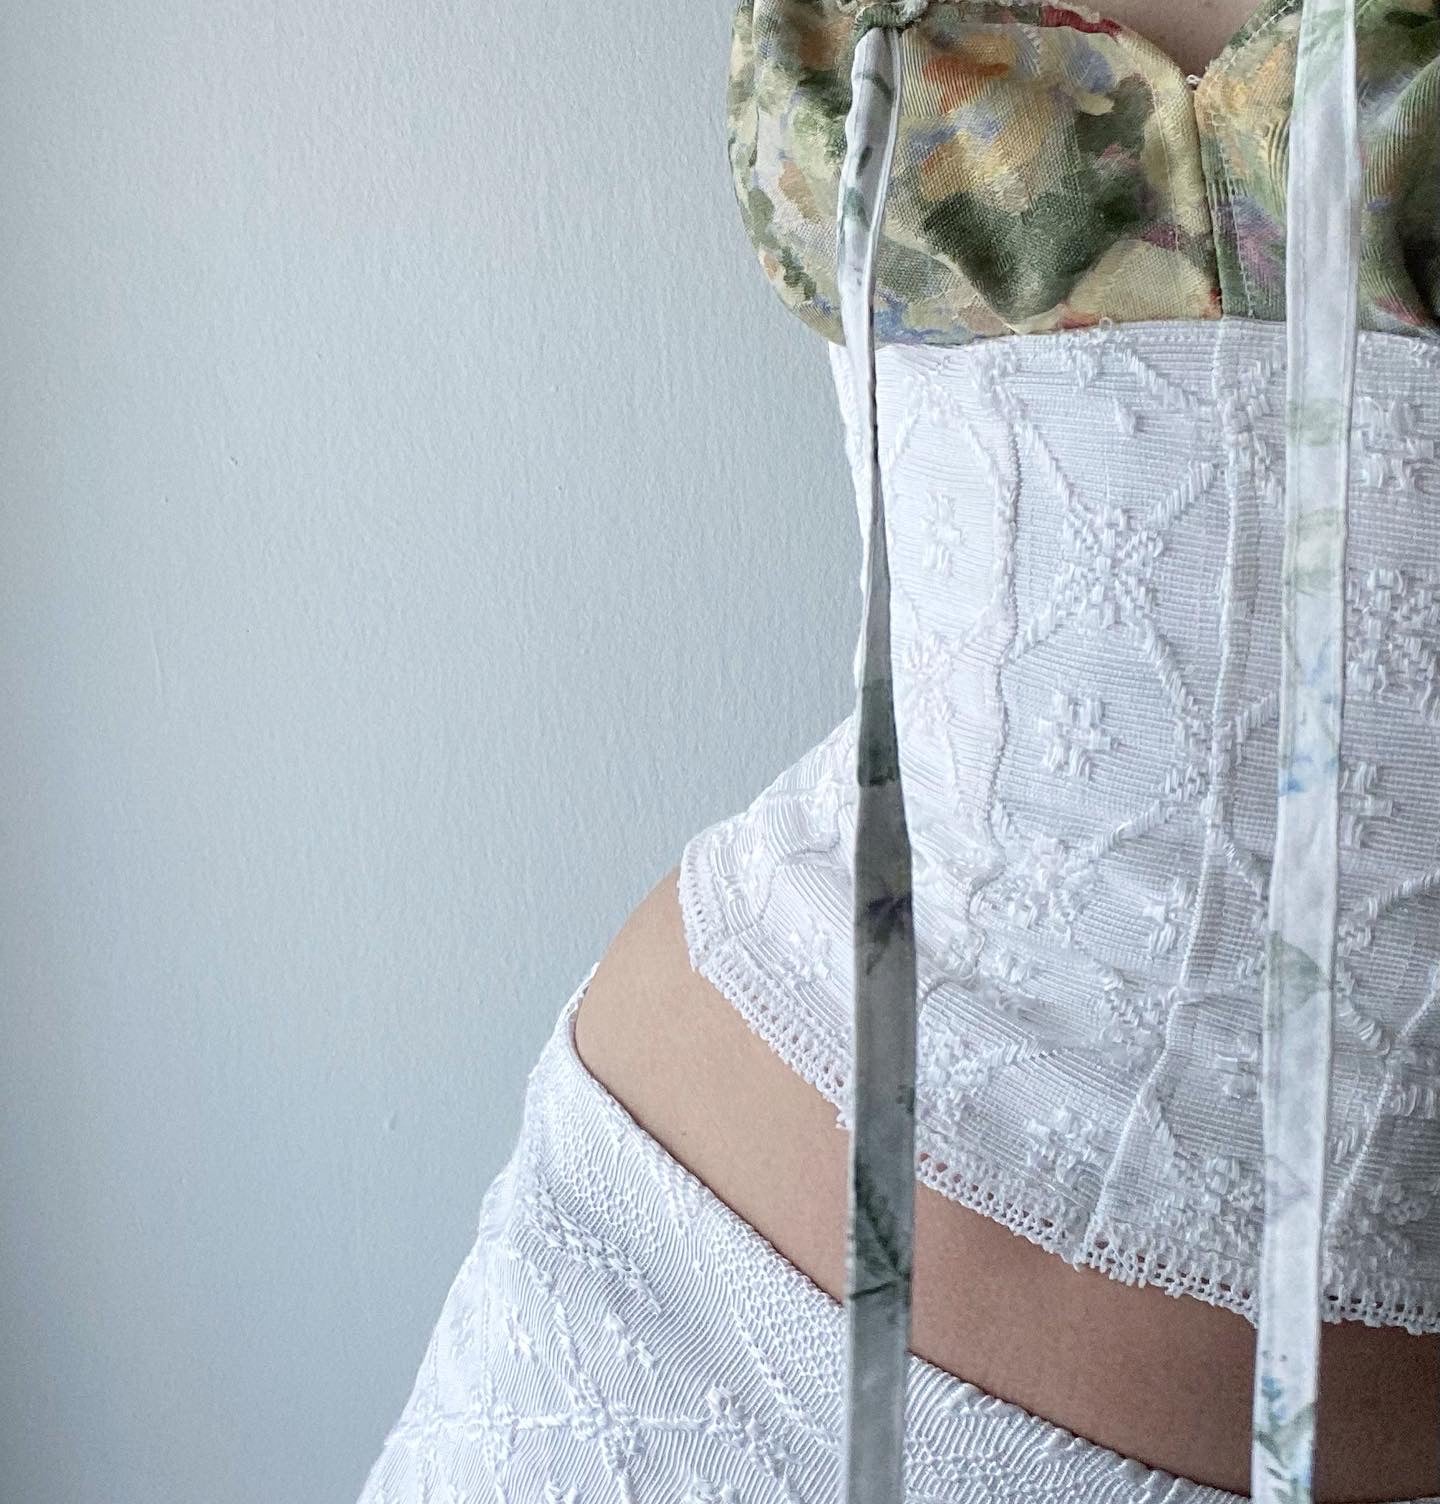 The Tapestry Corset 2.0